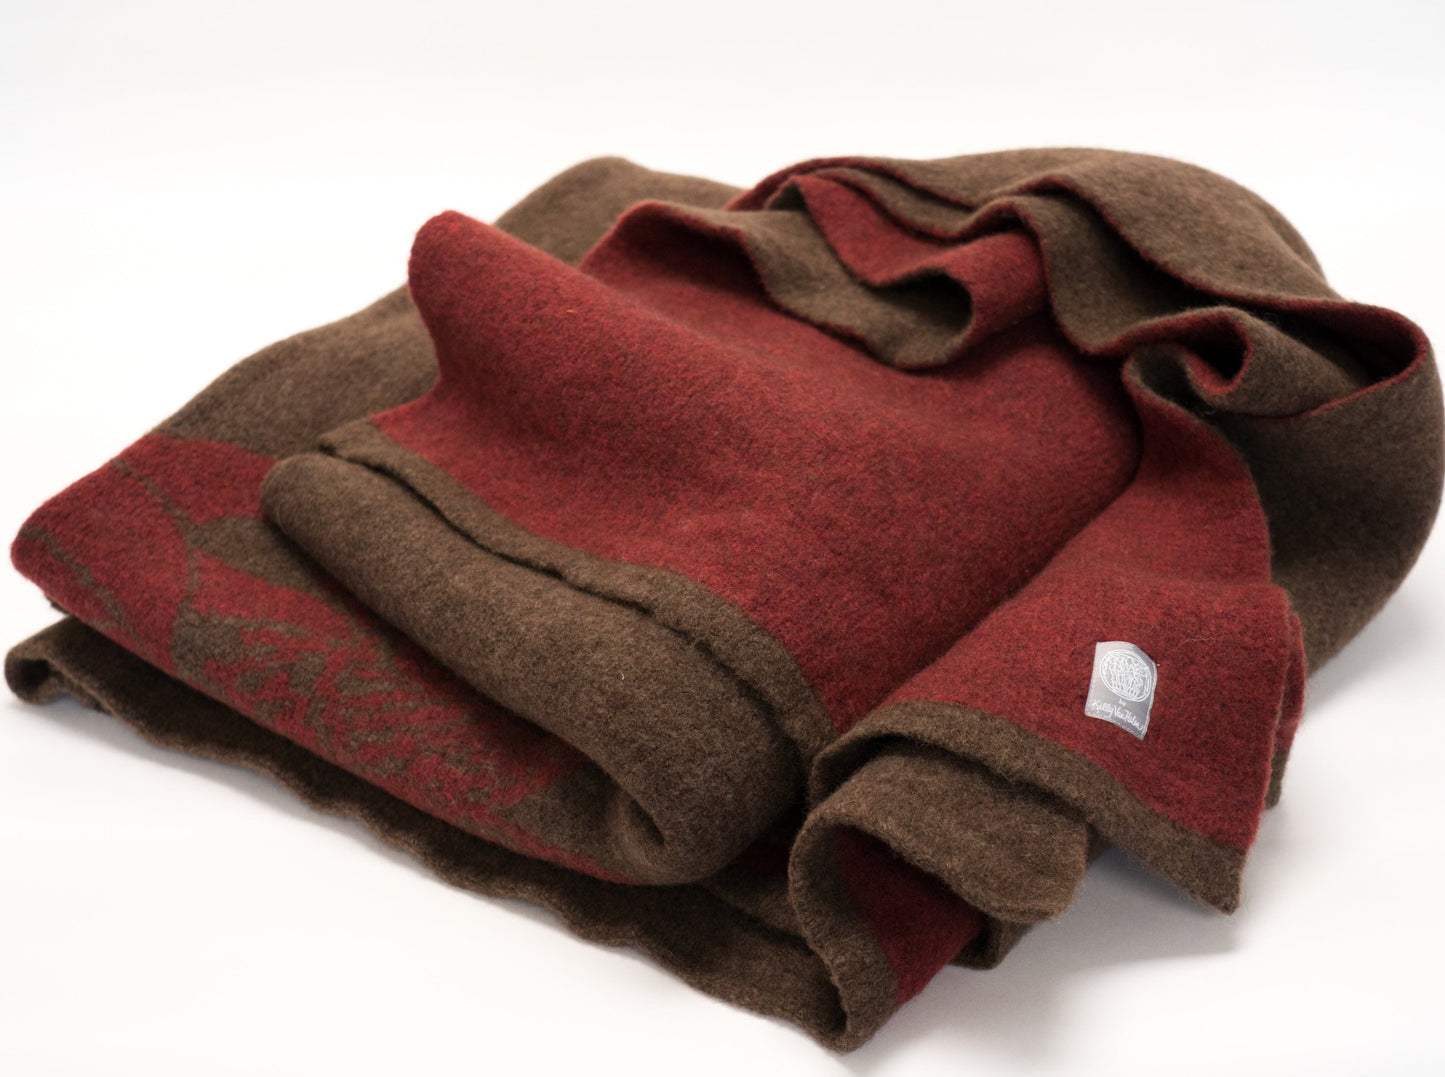 Cabin Throw in Tobacco & Brick Red